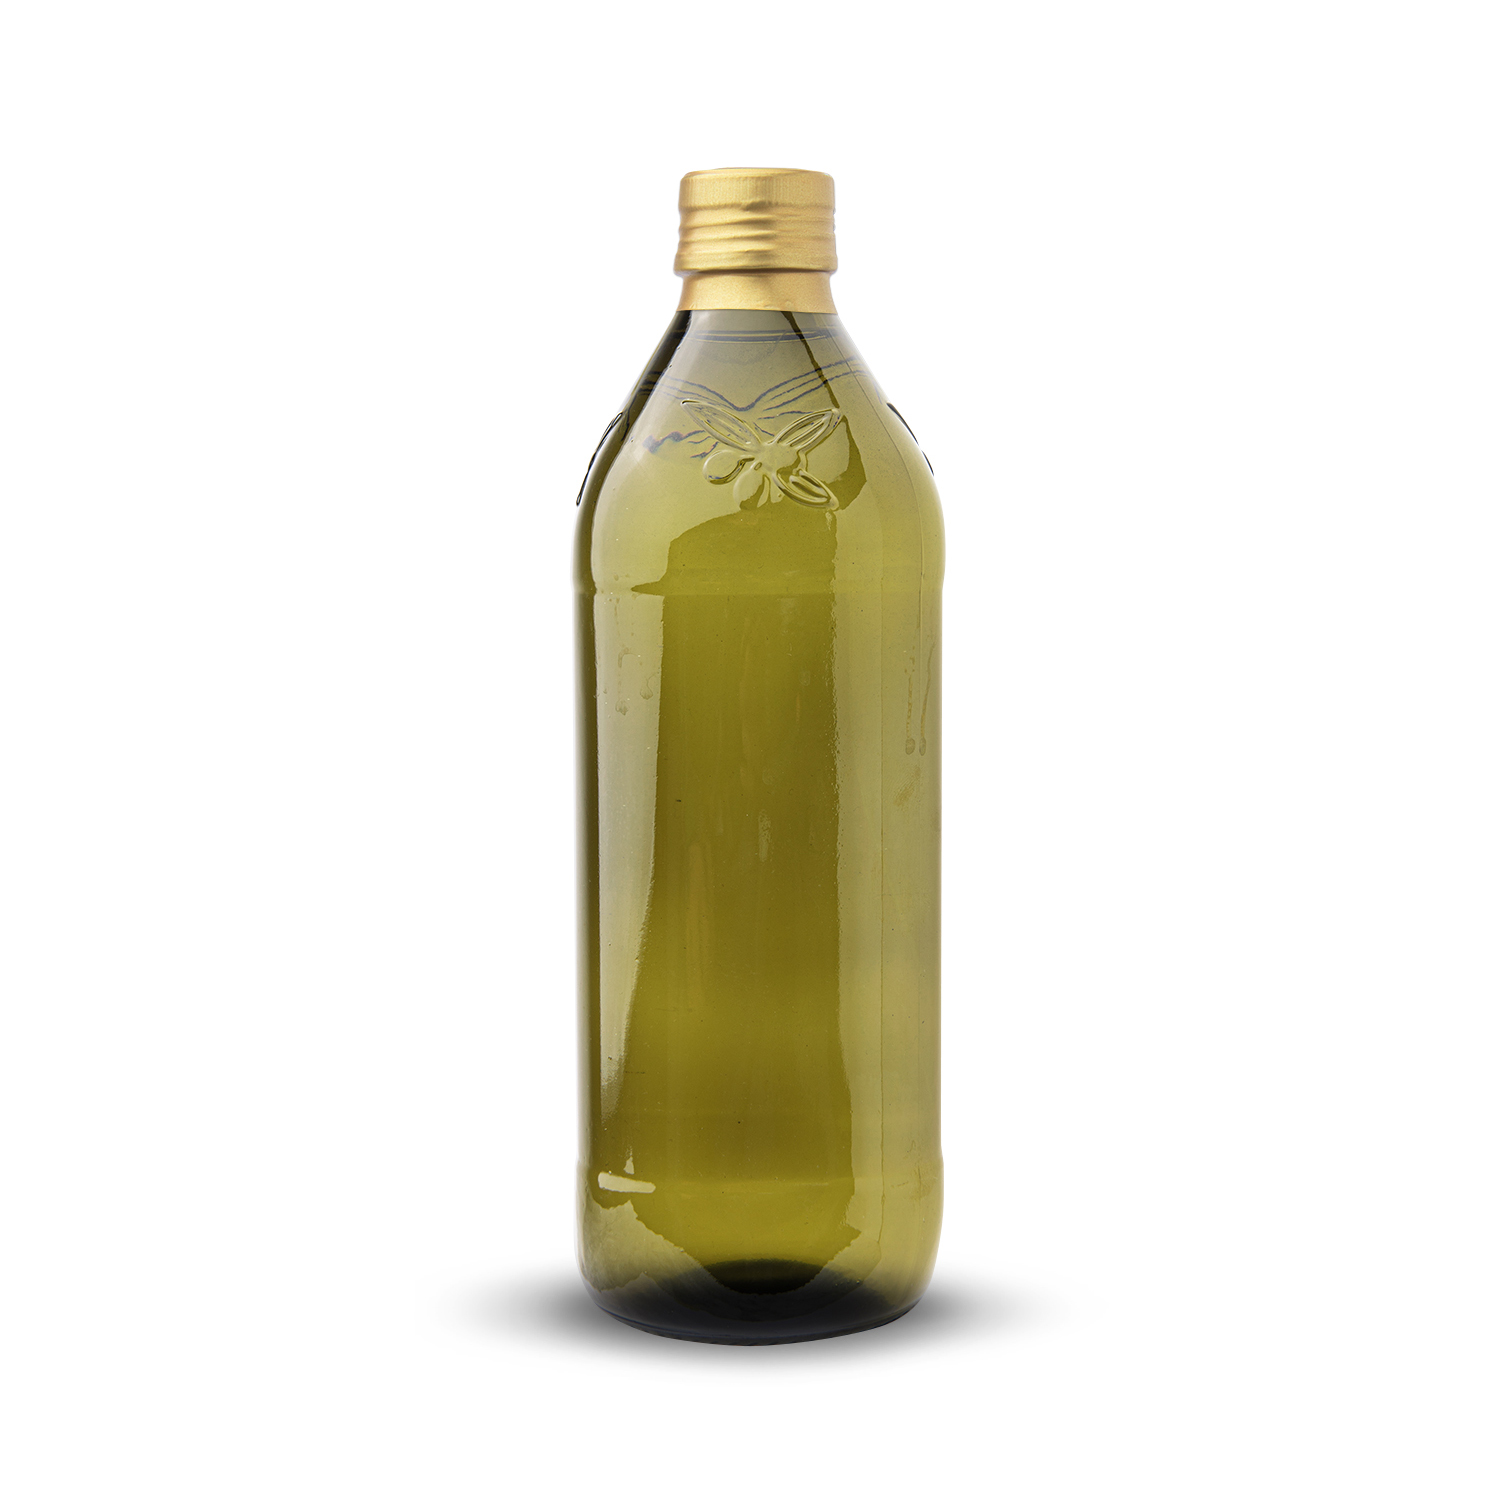 Customize ORGANIC EXTRA VIRGIN OLIVE OIL - EXTRA VIRGIN OLIVE OIL - PURE OLIVE OIL - POMACE OLIVE OIL  GRAPESEED OIL  Private Label, UMBRIA OLII INTERNATIONAL SPA , 100% Italy, condiments, EDIBLE OILS